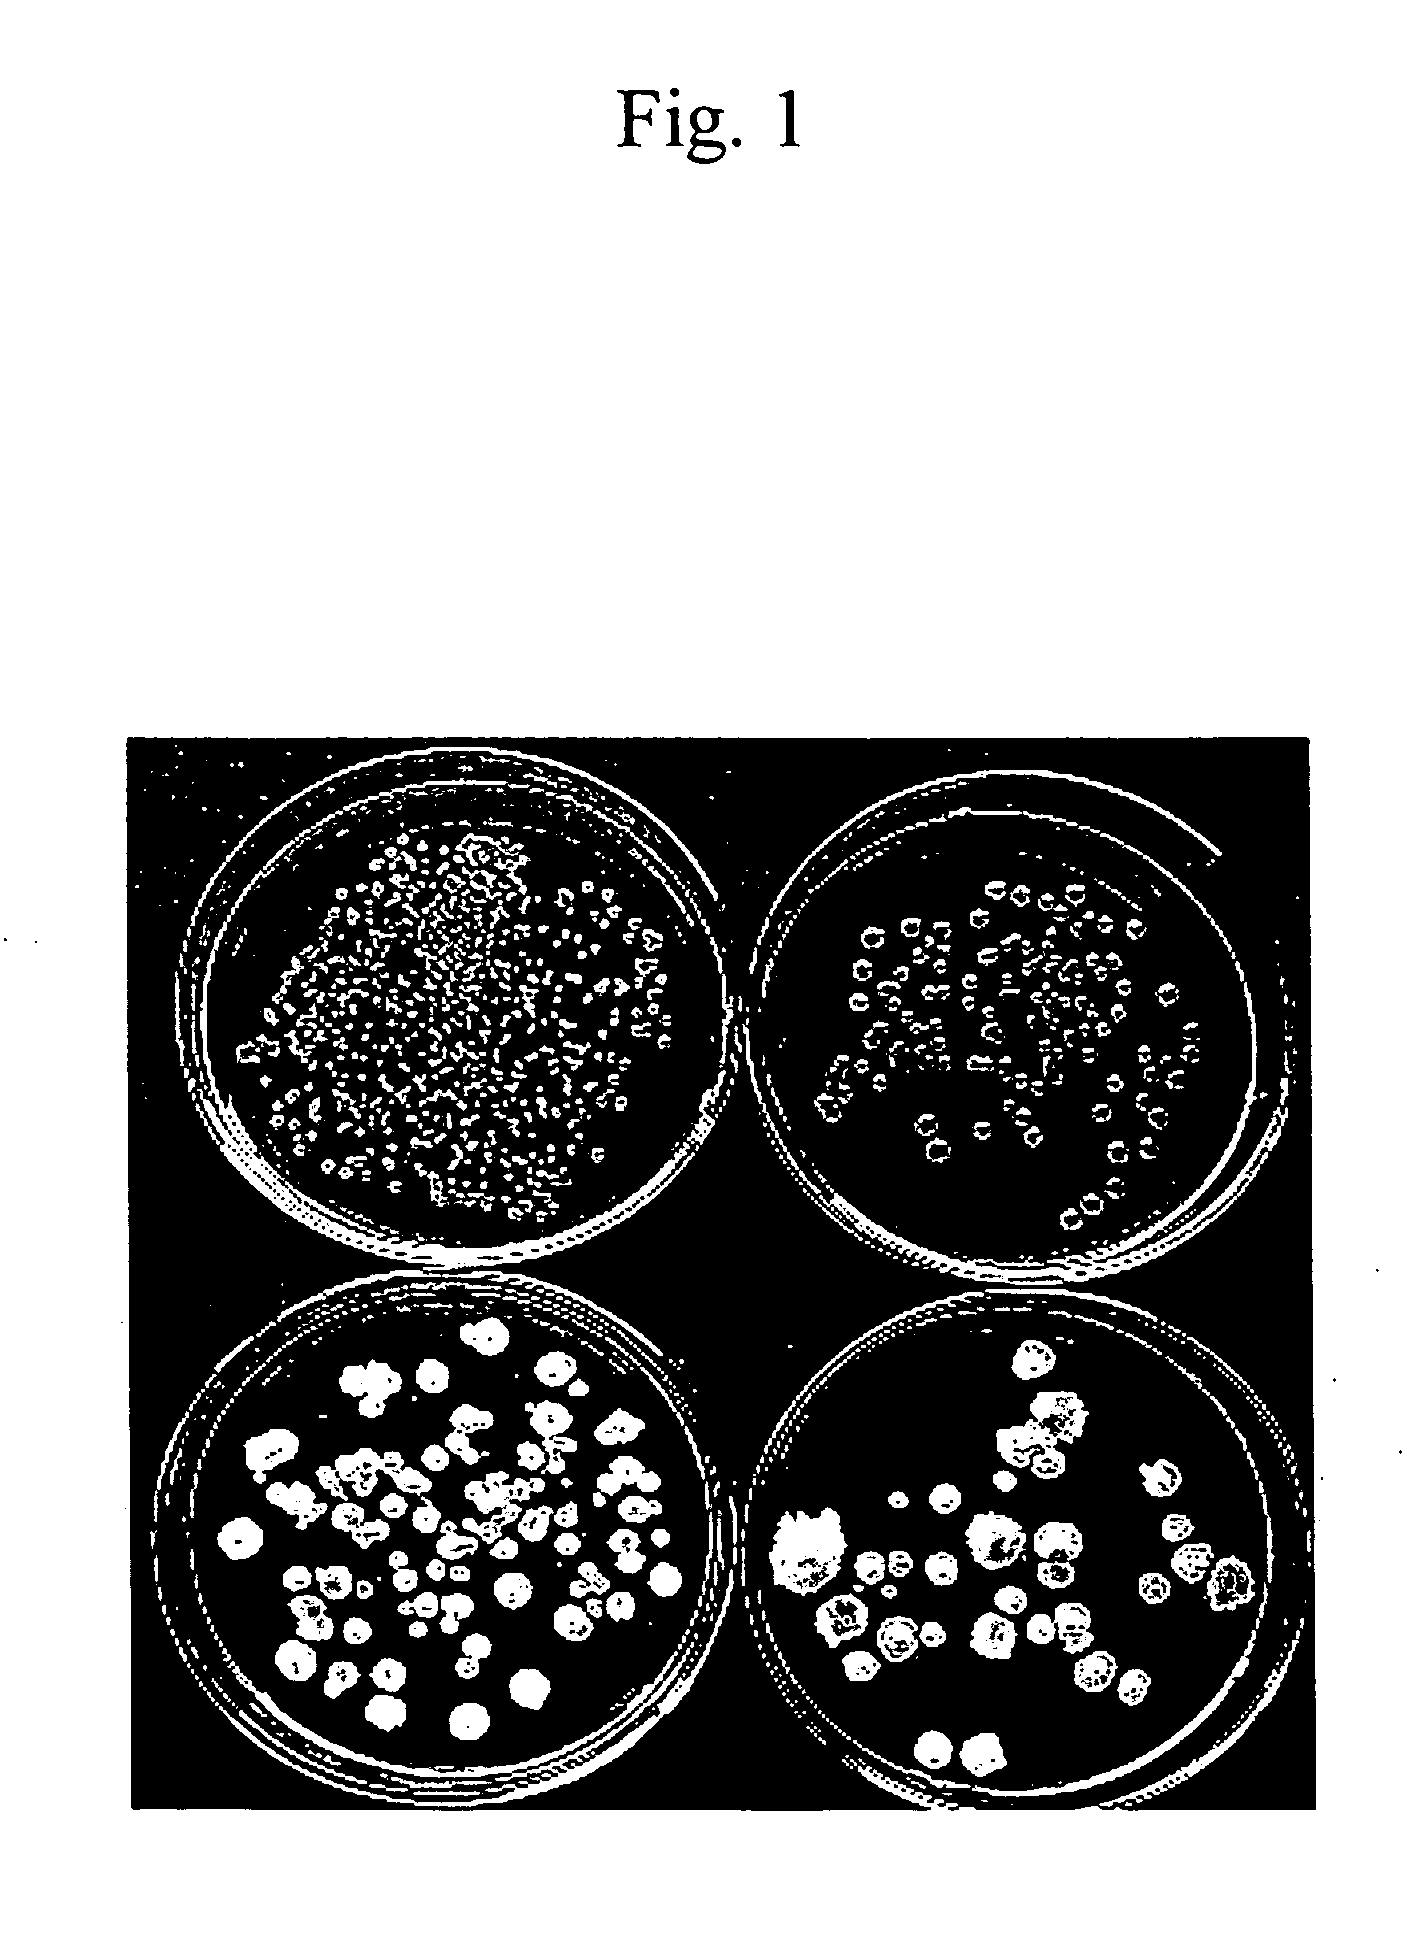 Method and agent for controlling plant disease using bacteria of genus bacillus